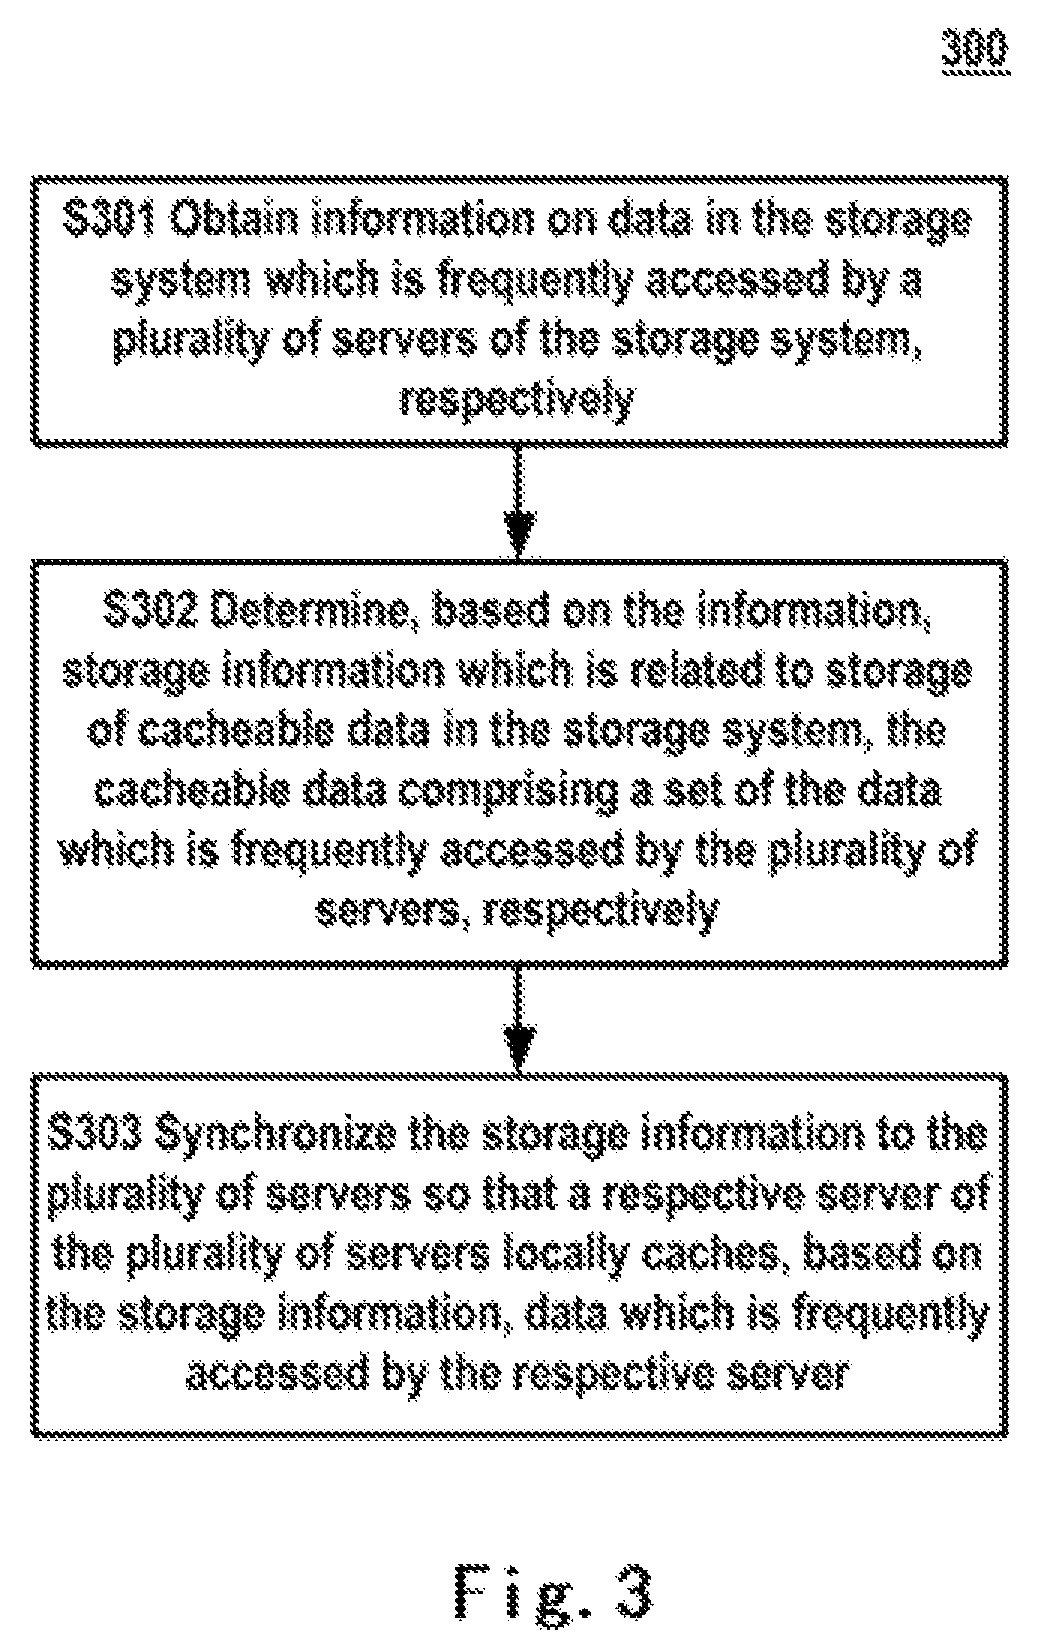 Extending a cache of a storage system